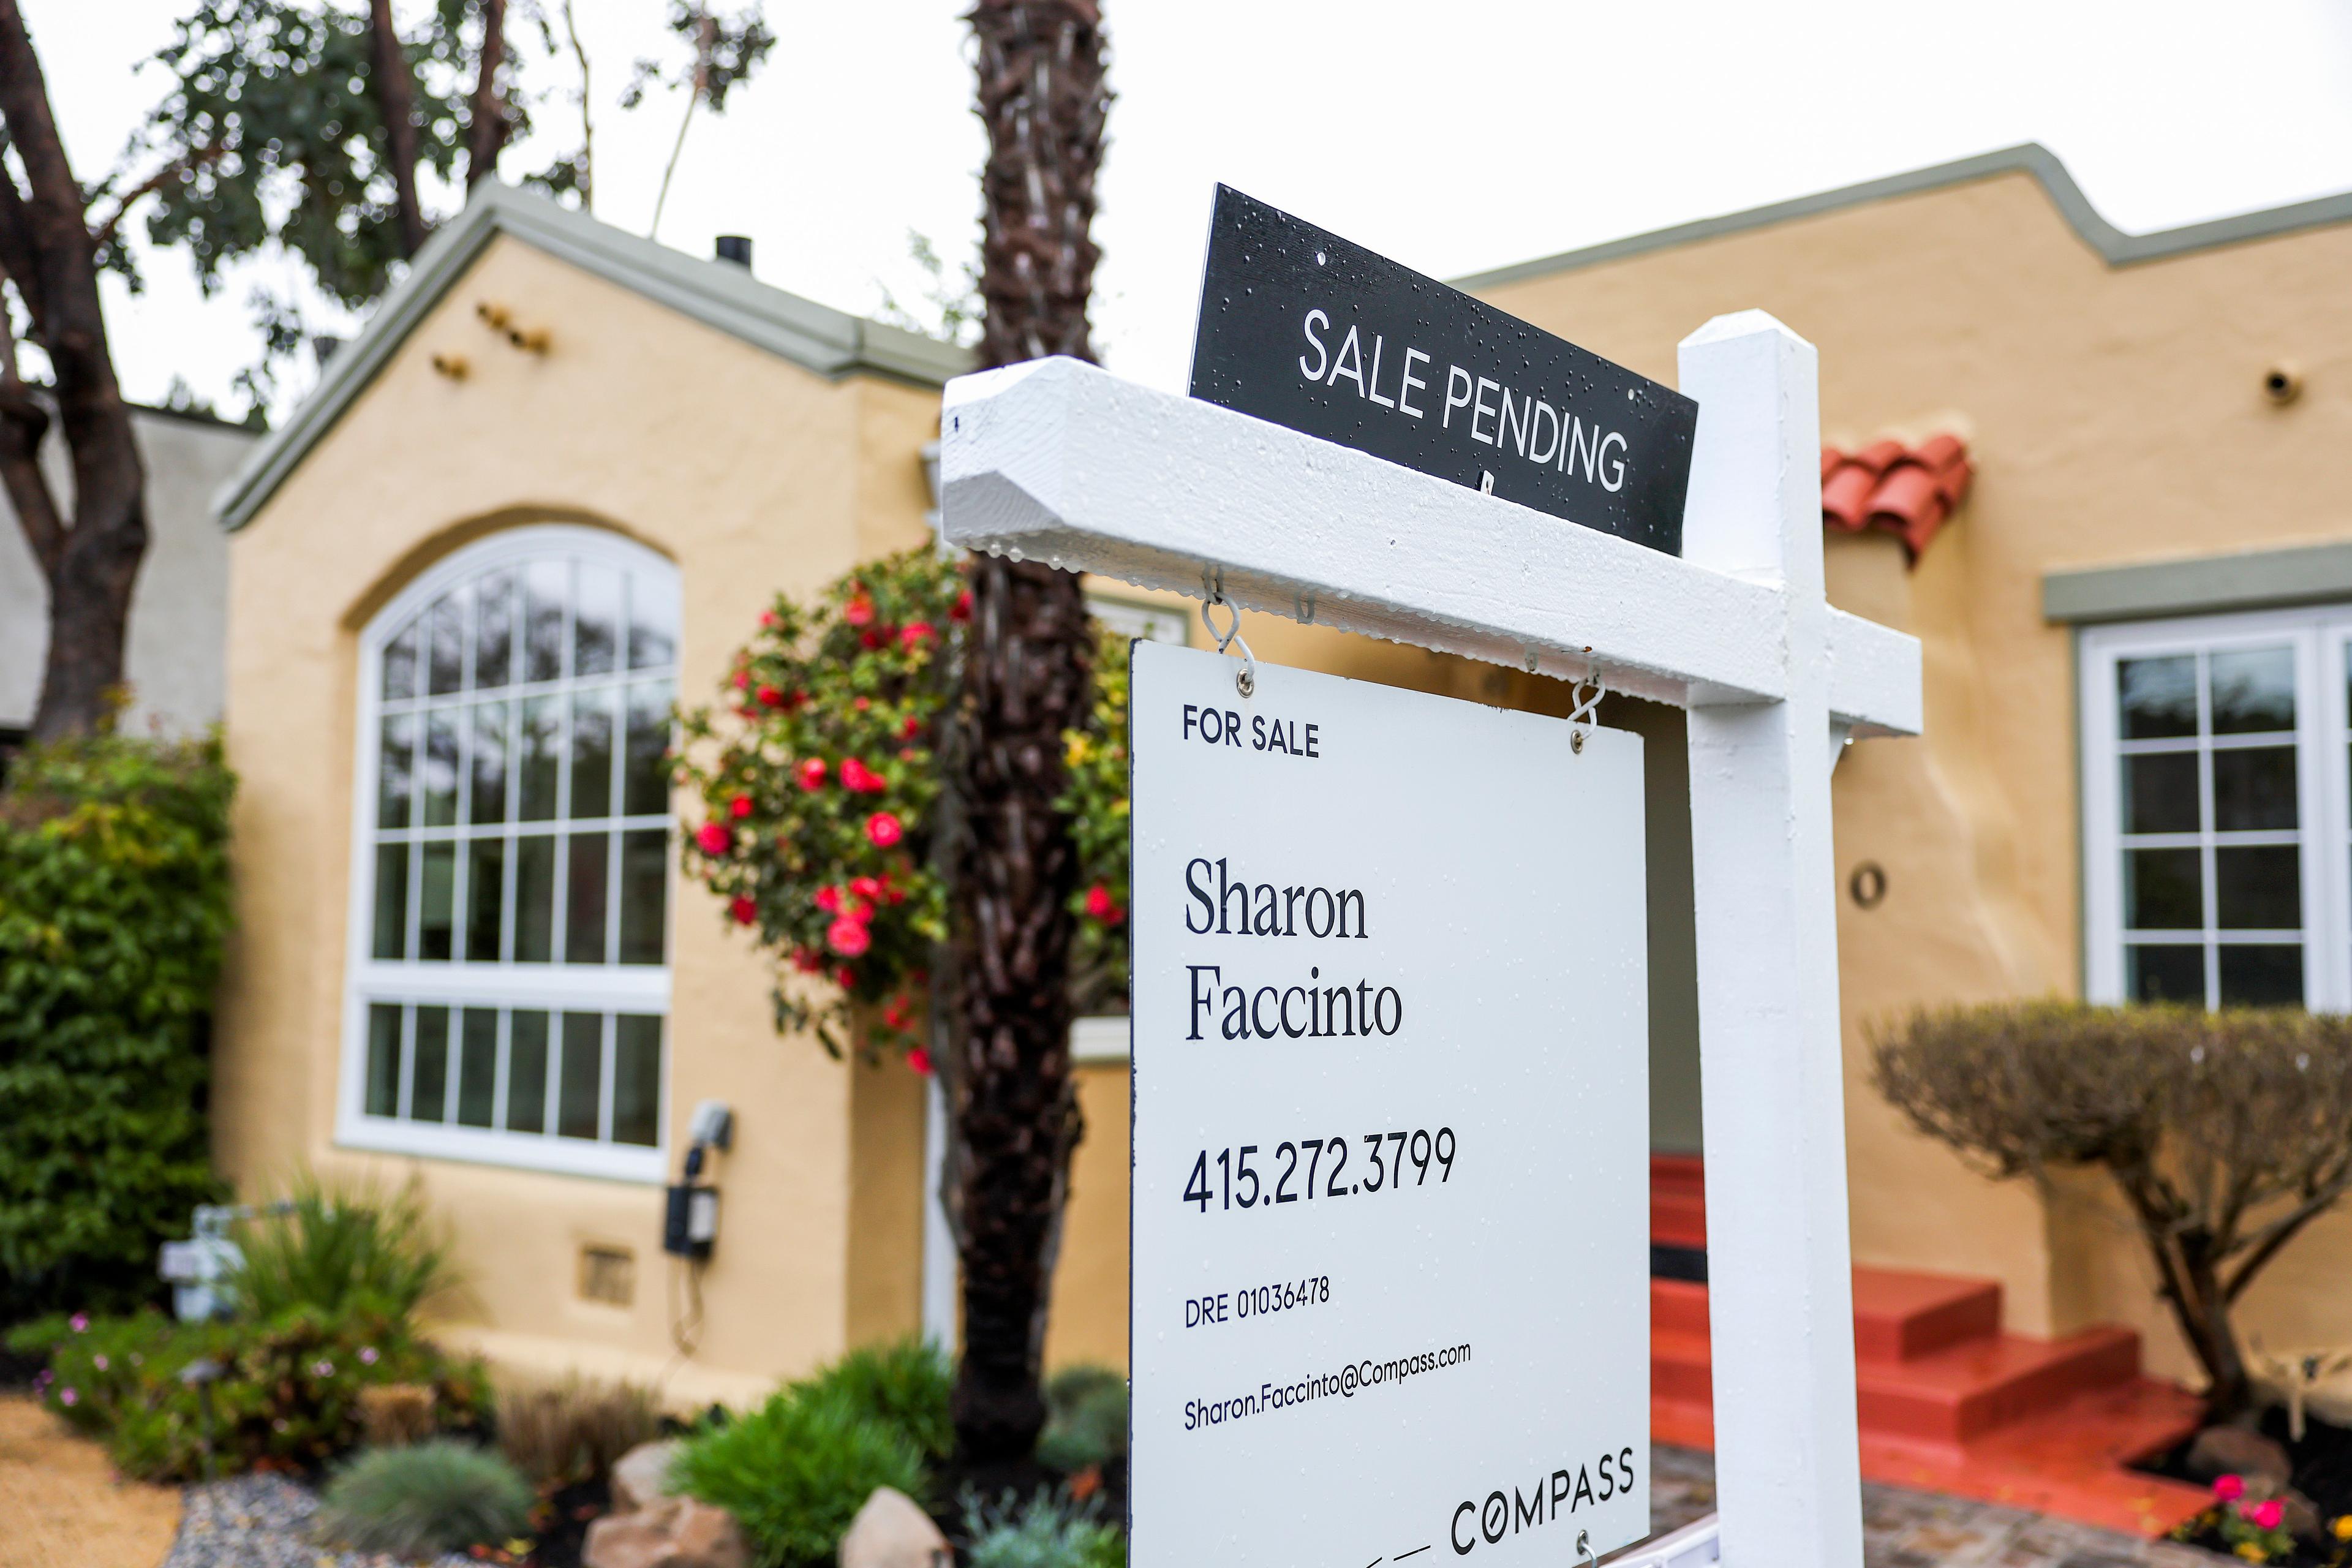 California to Help 1,700 First-Generation Homebuyers With Down Payments